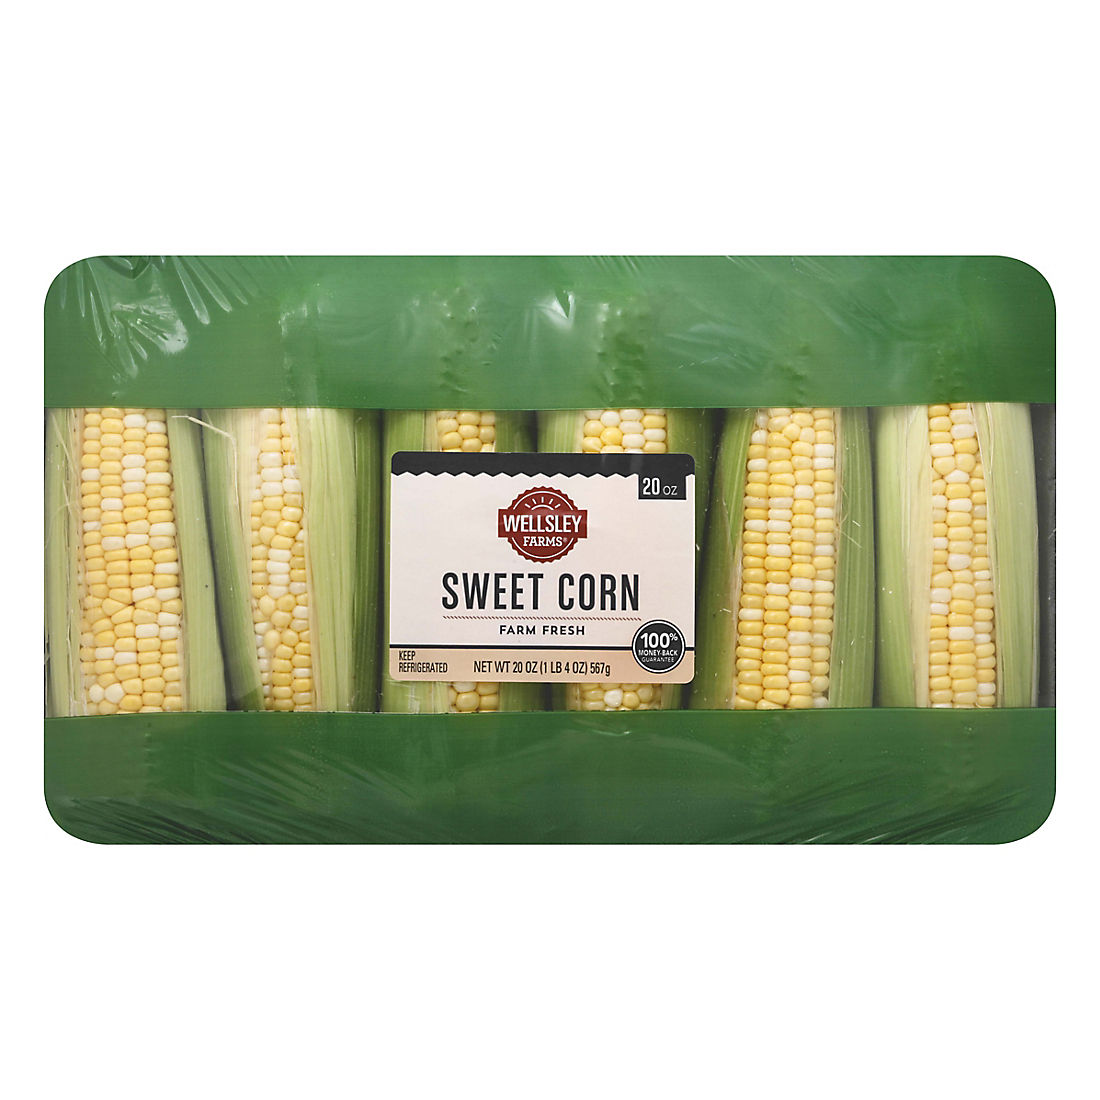 Dolls House 3 Sweet Corn on the Cob Miniature Kitchen Vegetable Shop Accessory